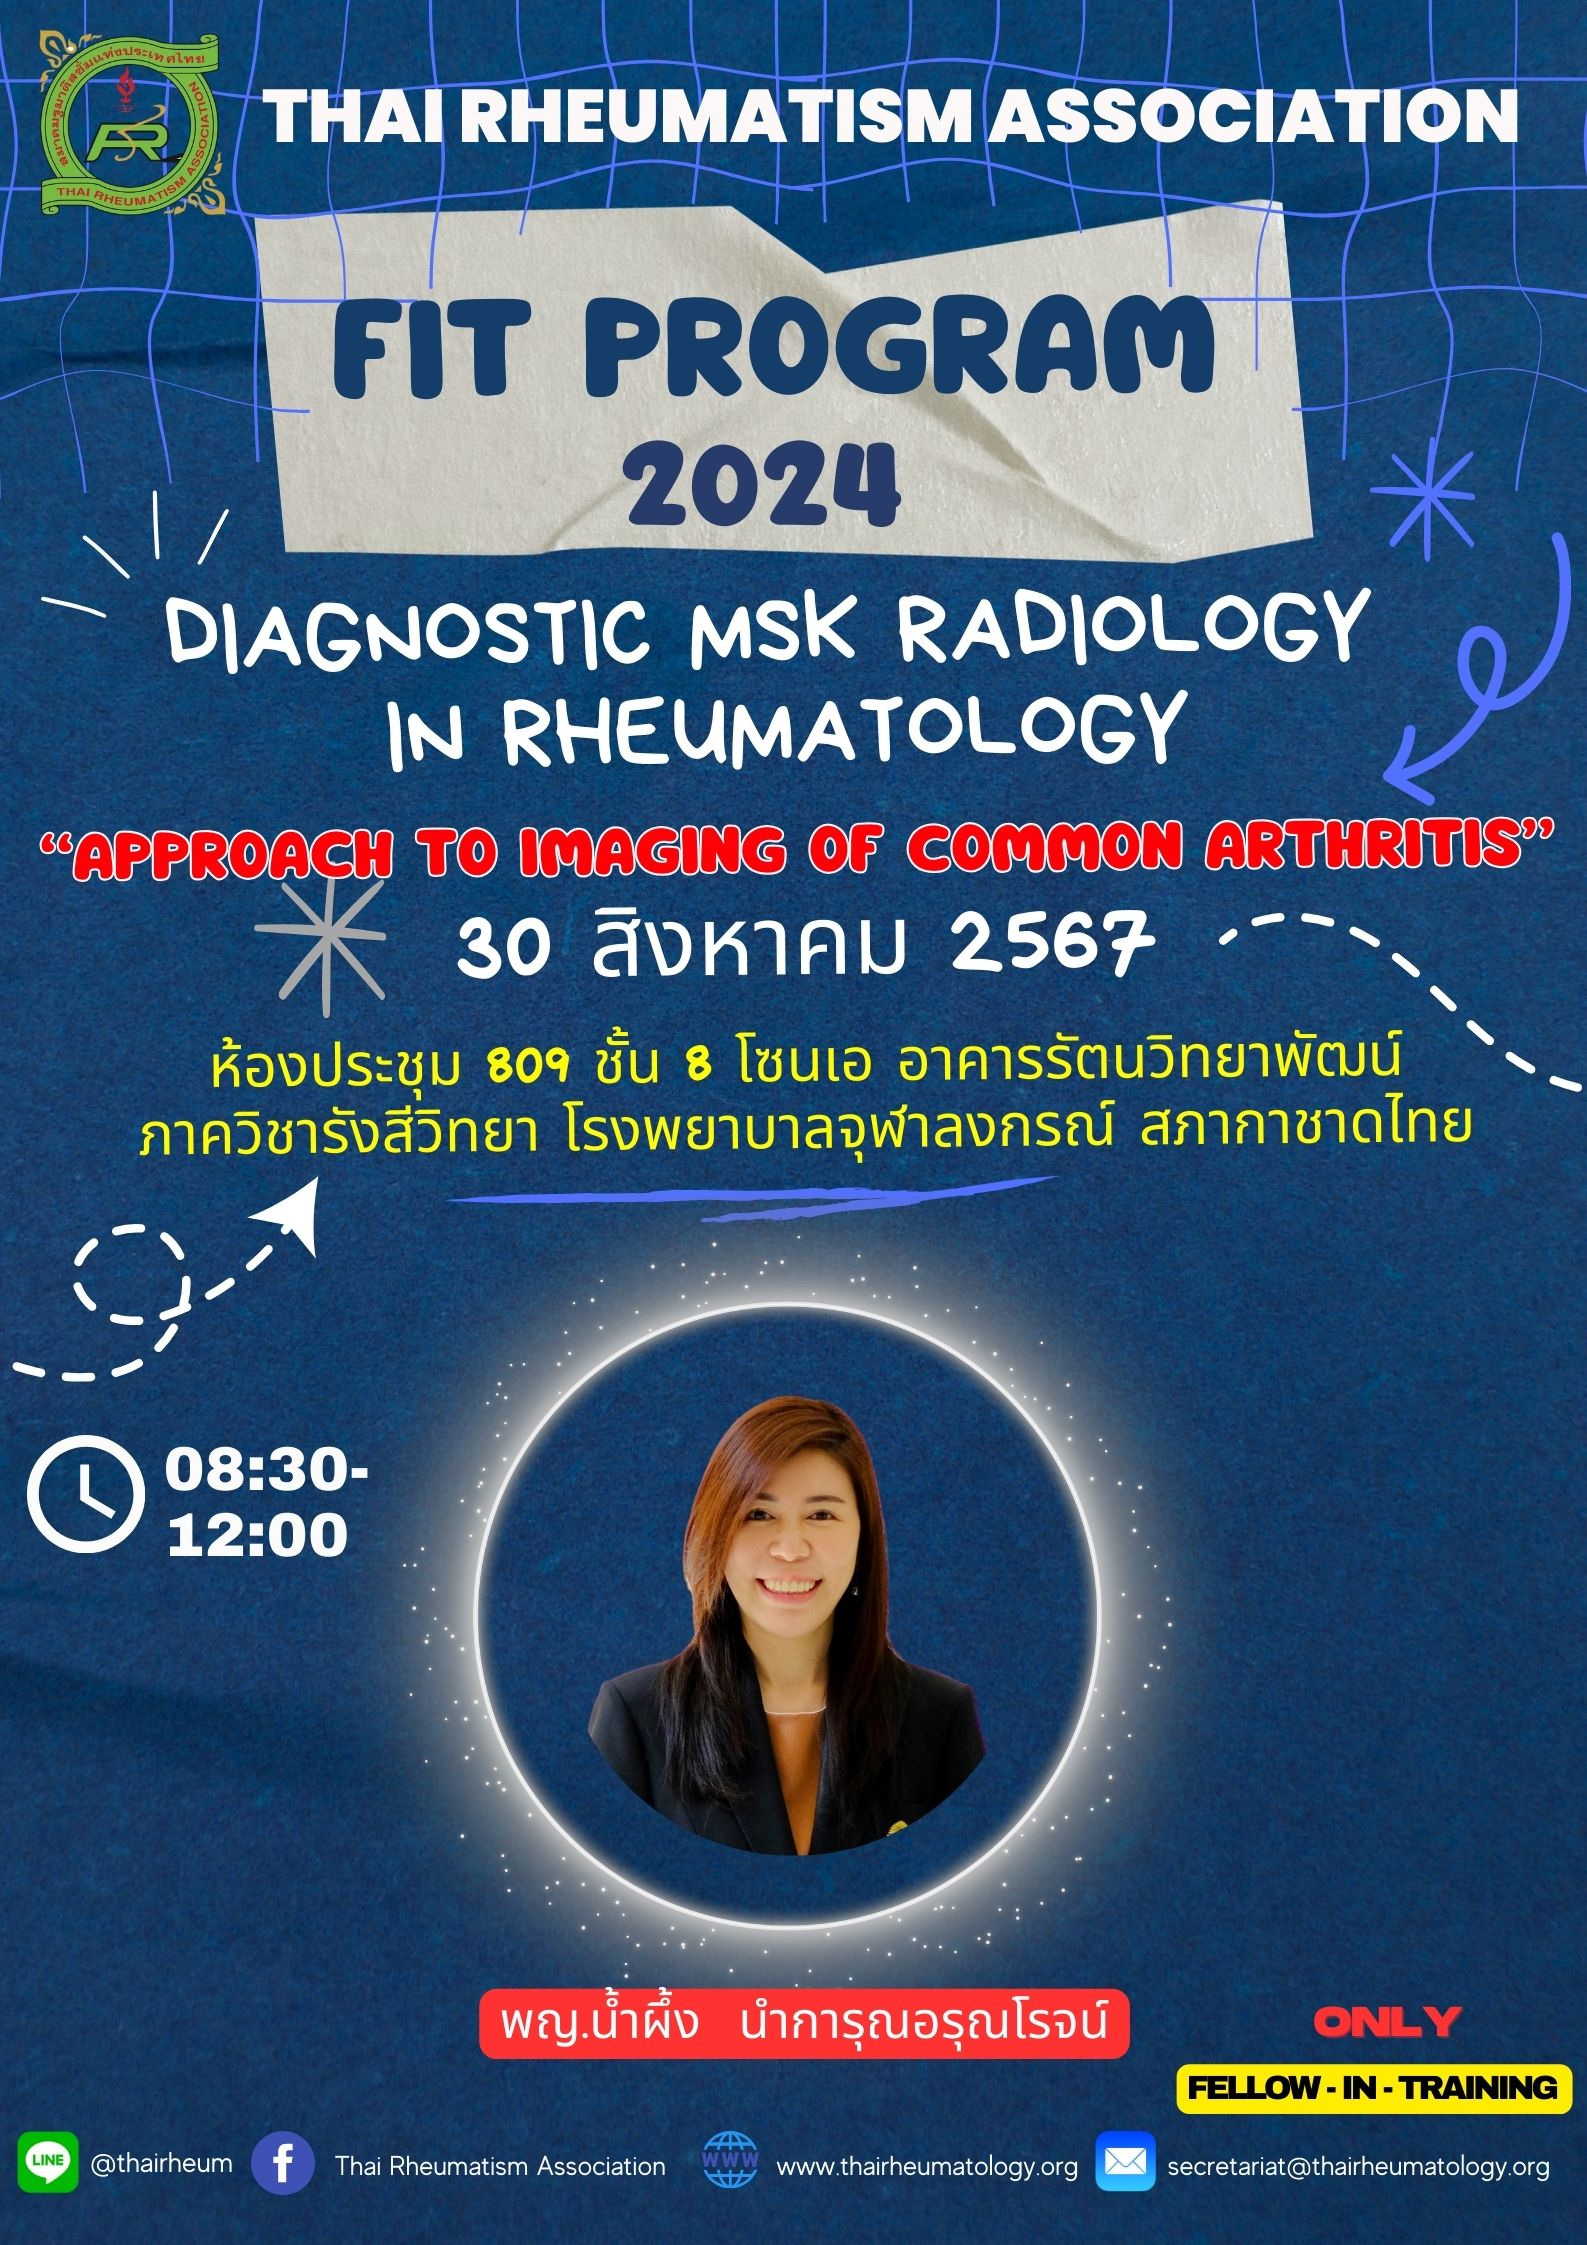 Fellow in Training (FIT2024) Radiography Program